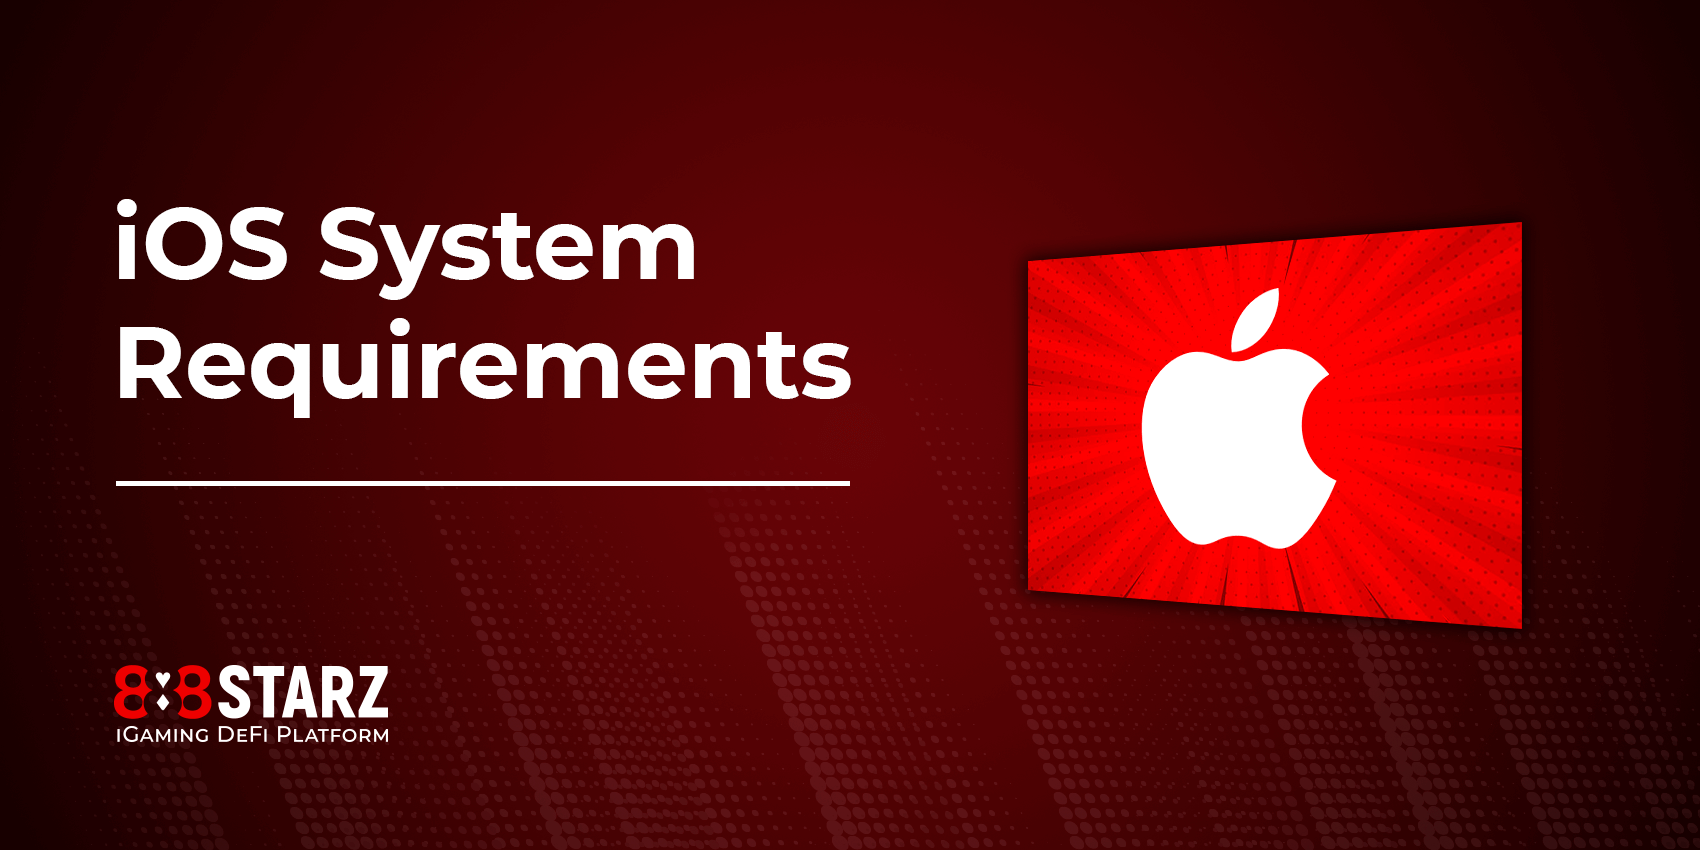 System Requirements for iOS Users